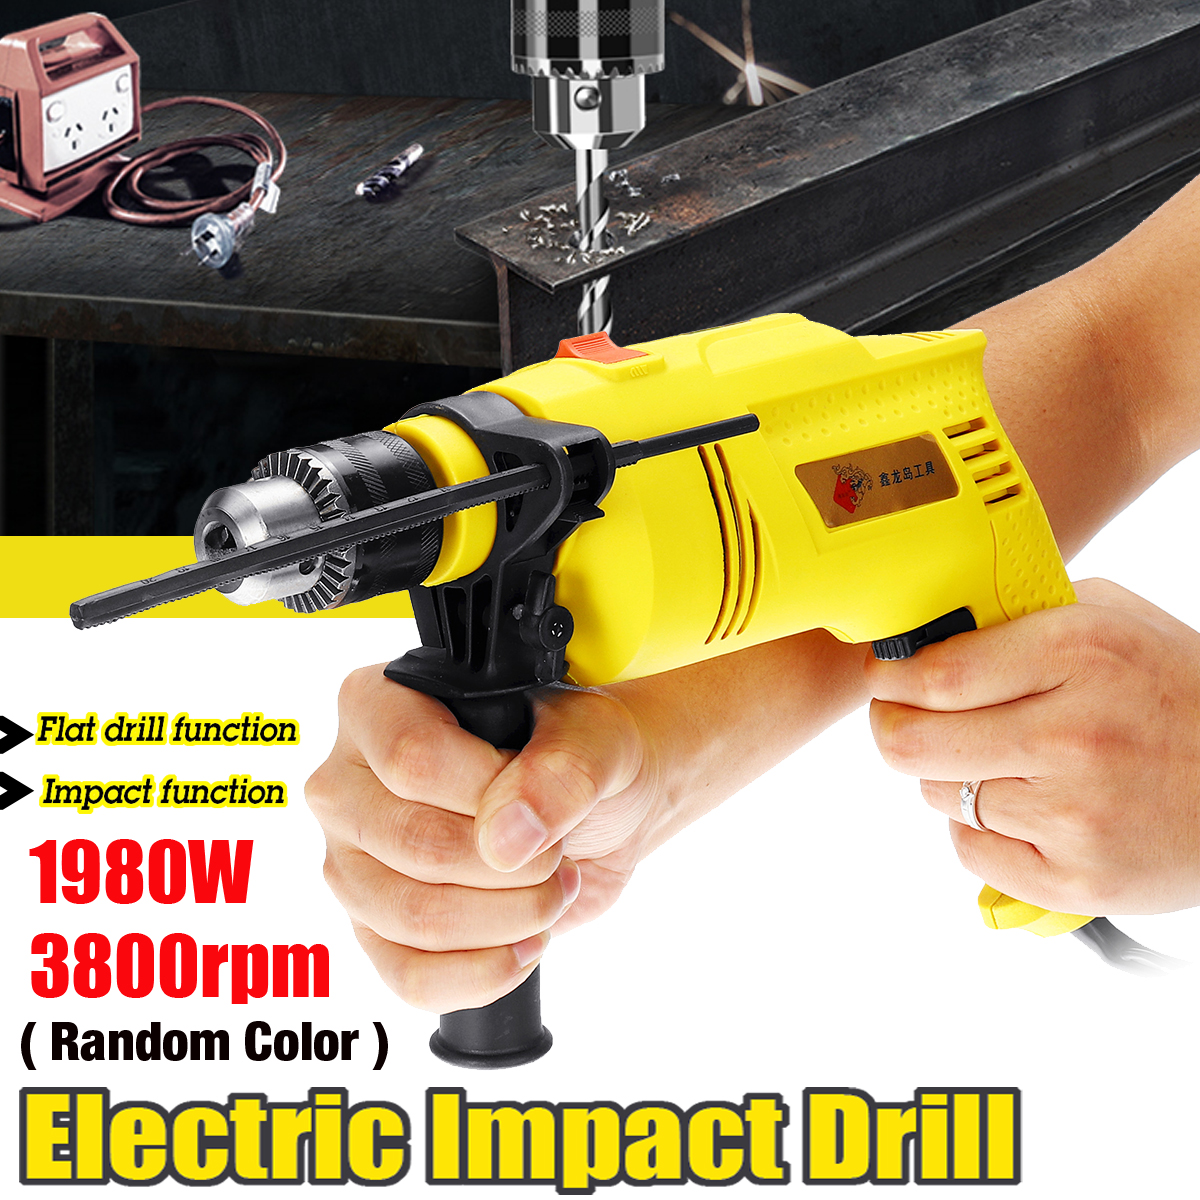 1980W-3800rpm-Electric-Impact-Drill-0-3800rmin-Electric-Drill-Five-Axes-Linkage-Power-Drills-Powerfu-1468497-1